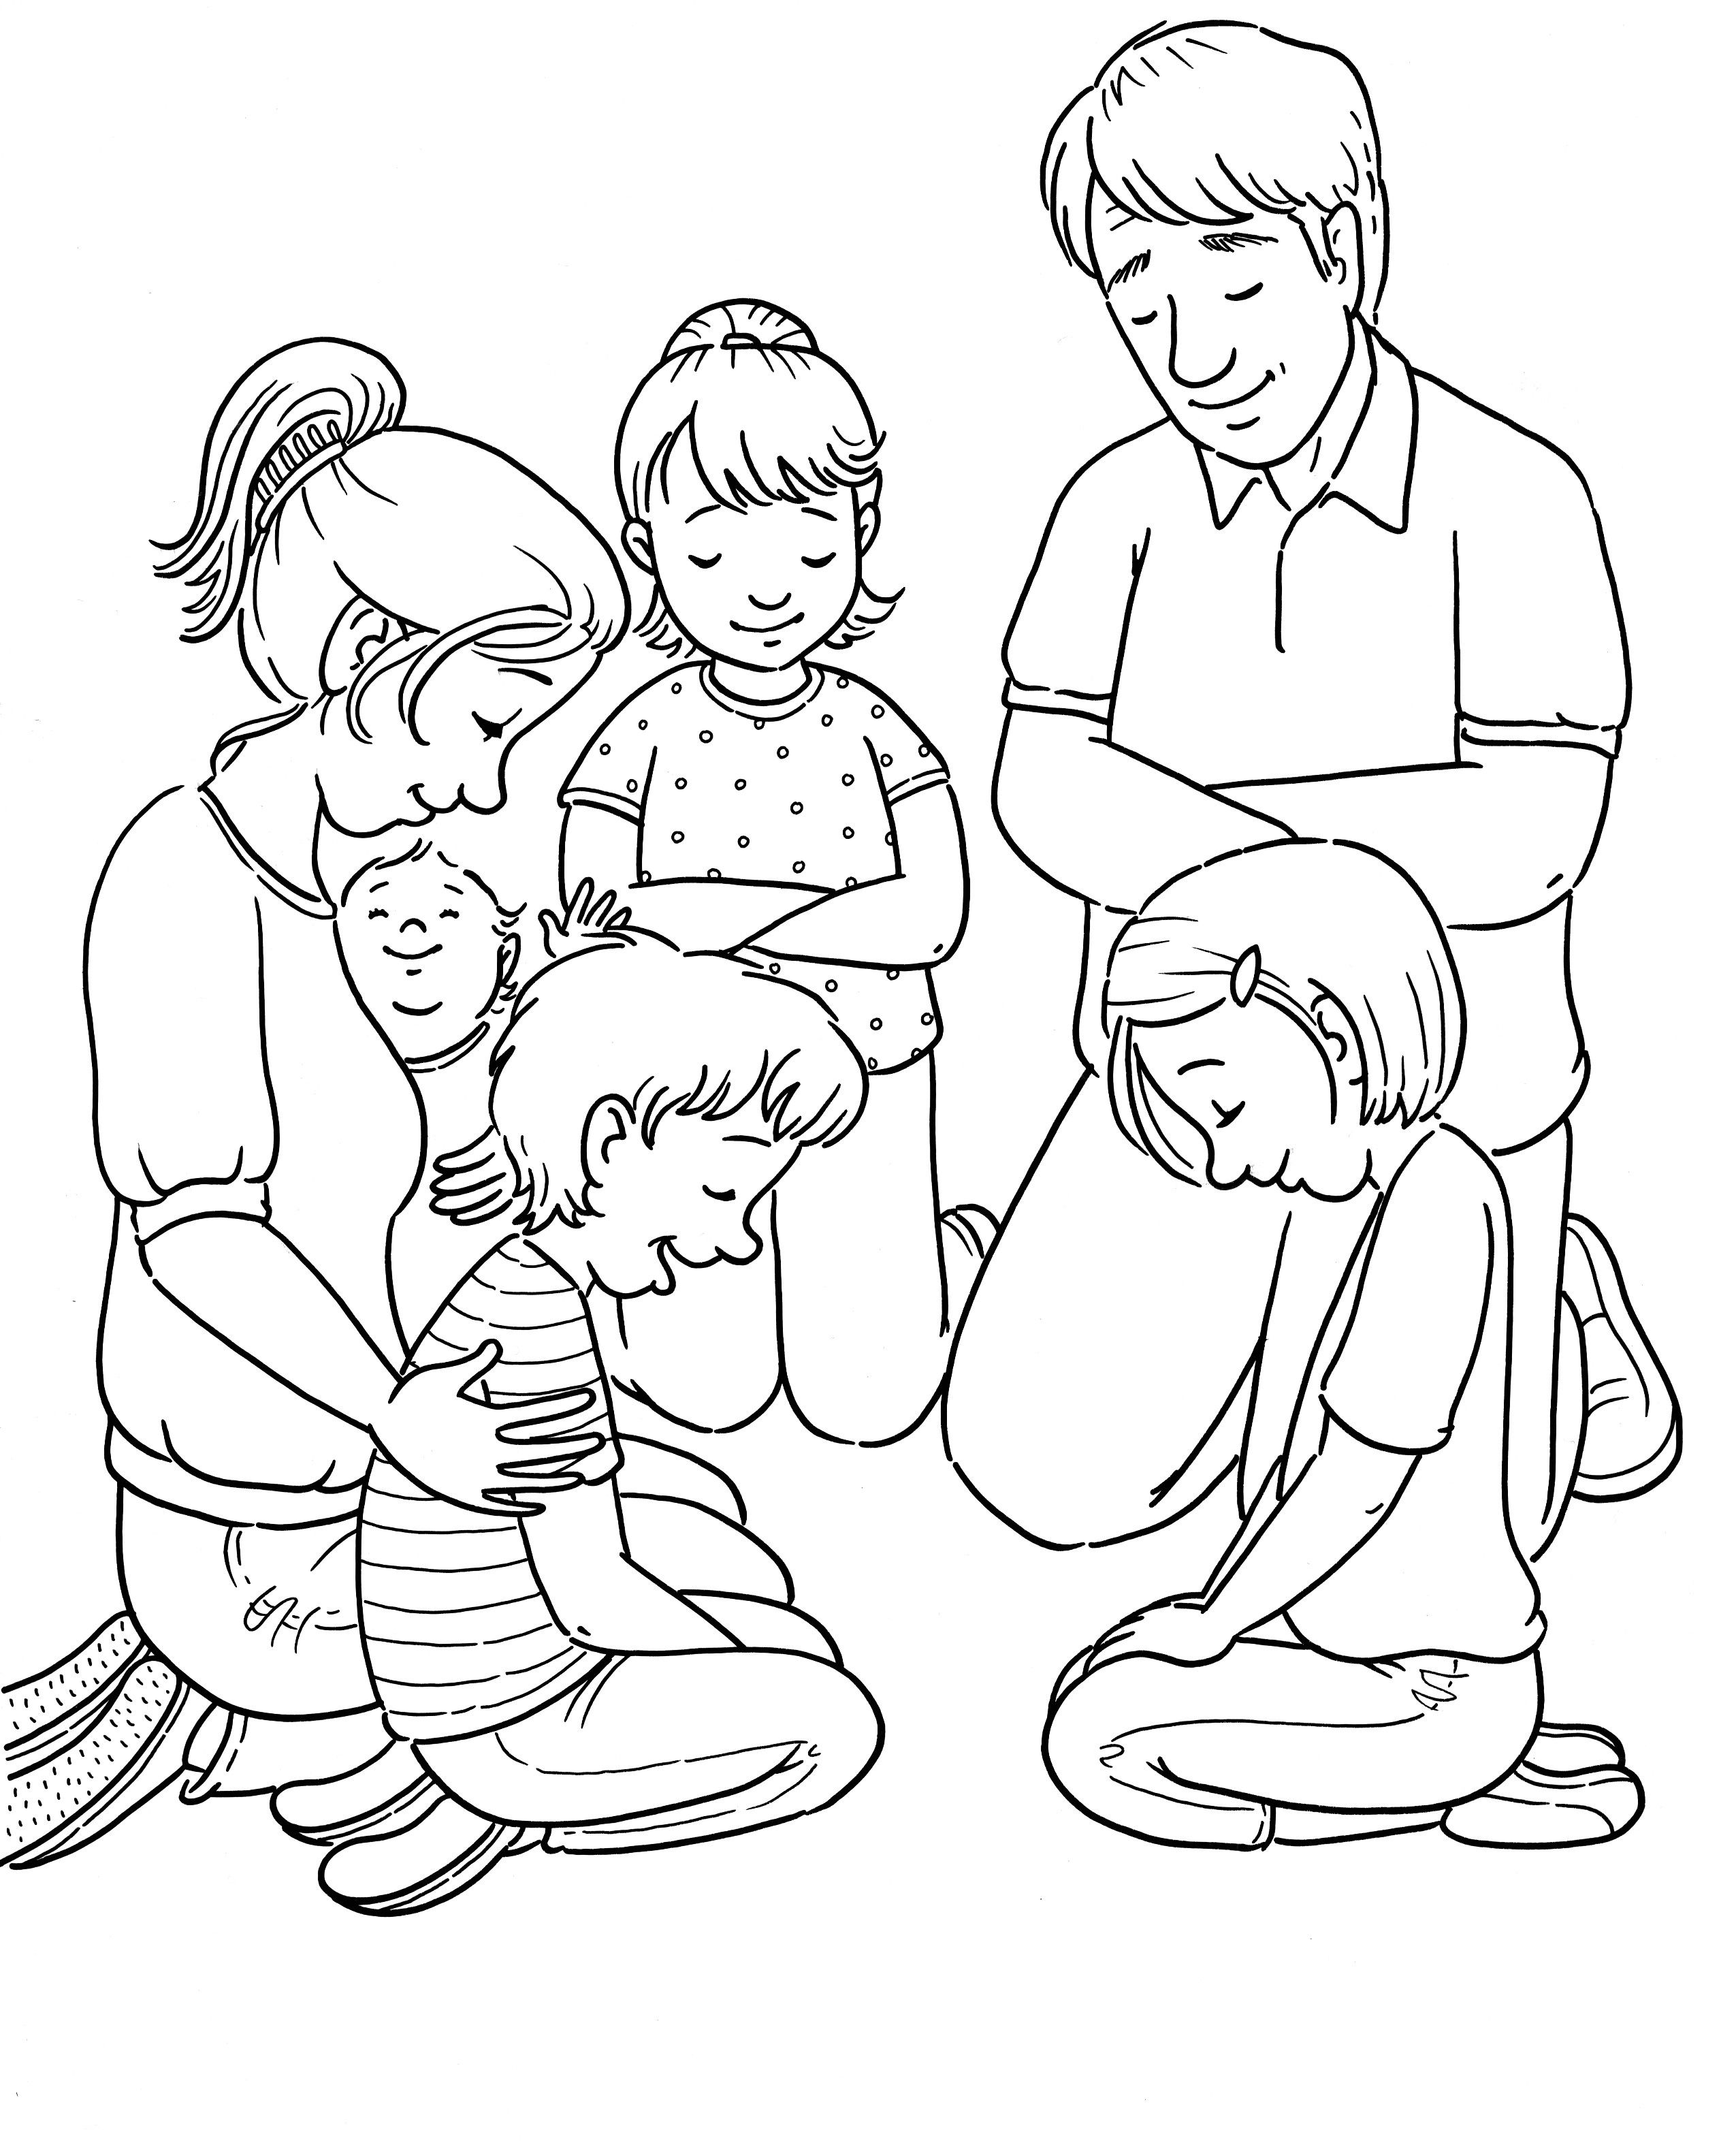 Prayer Coloring Pages / Prayer Coloring Page Coloring Home - Free lord